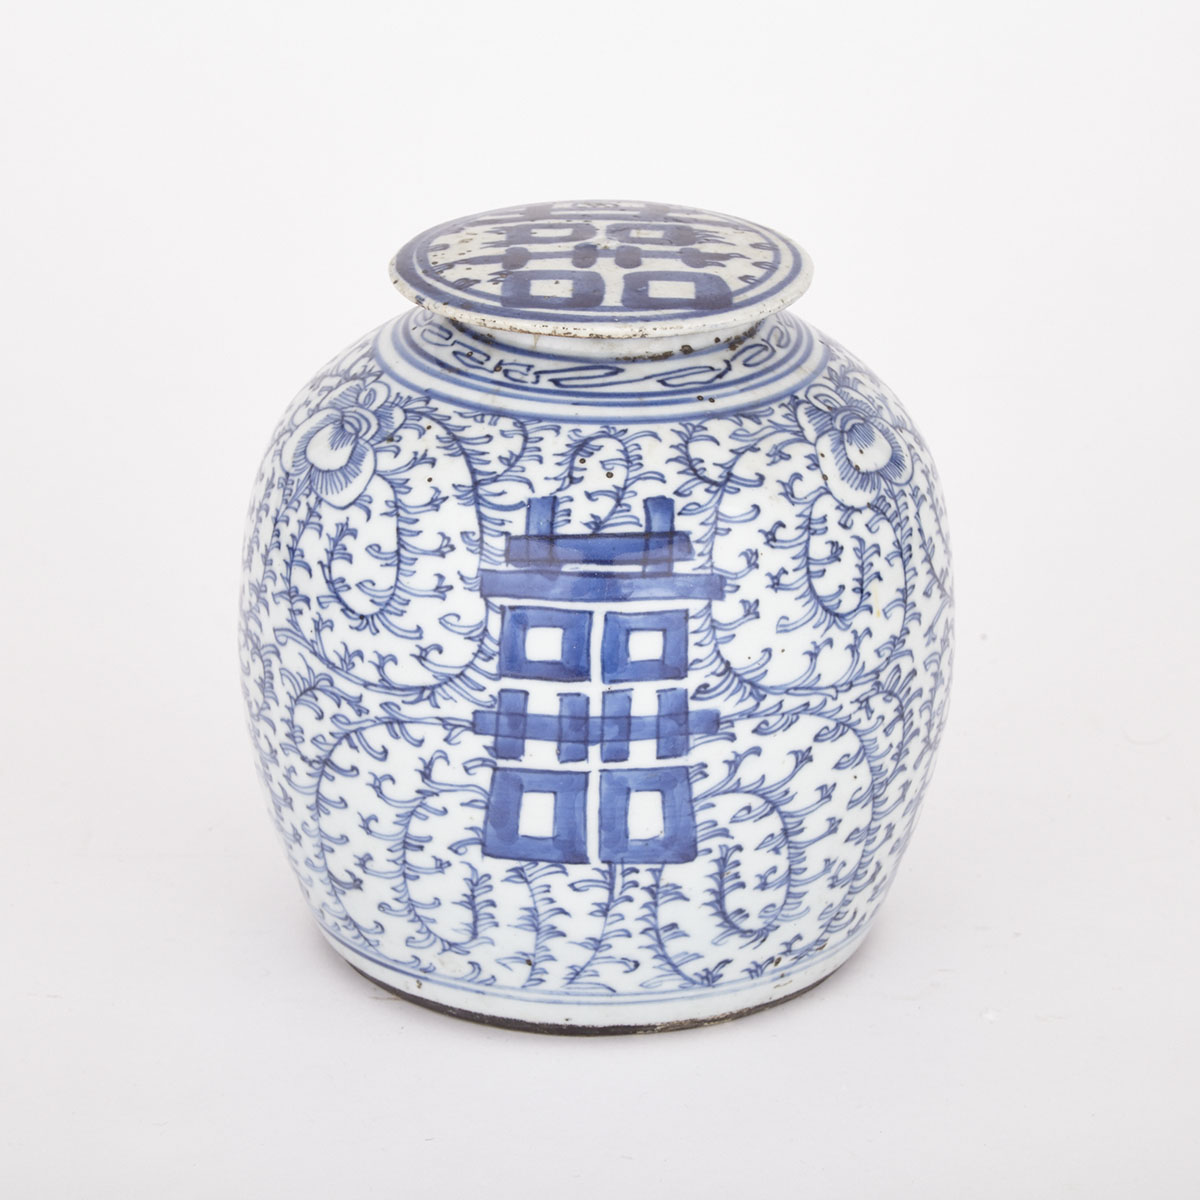 Double Happiness Blue and White Covered Jar, 19th Century